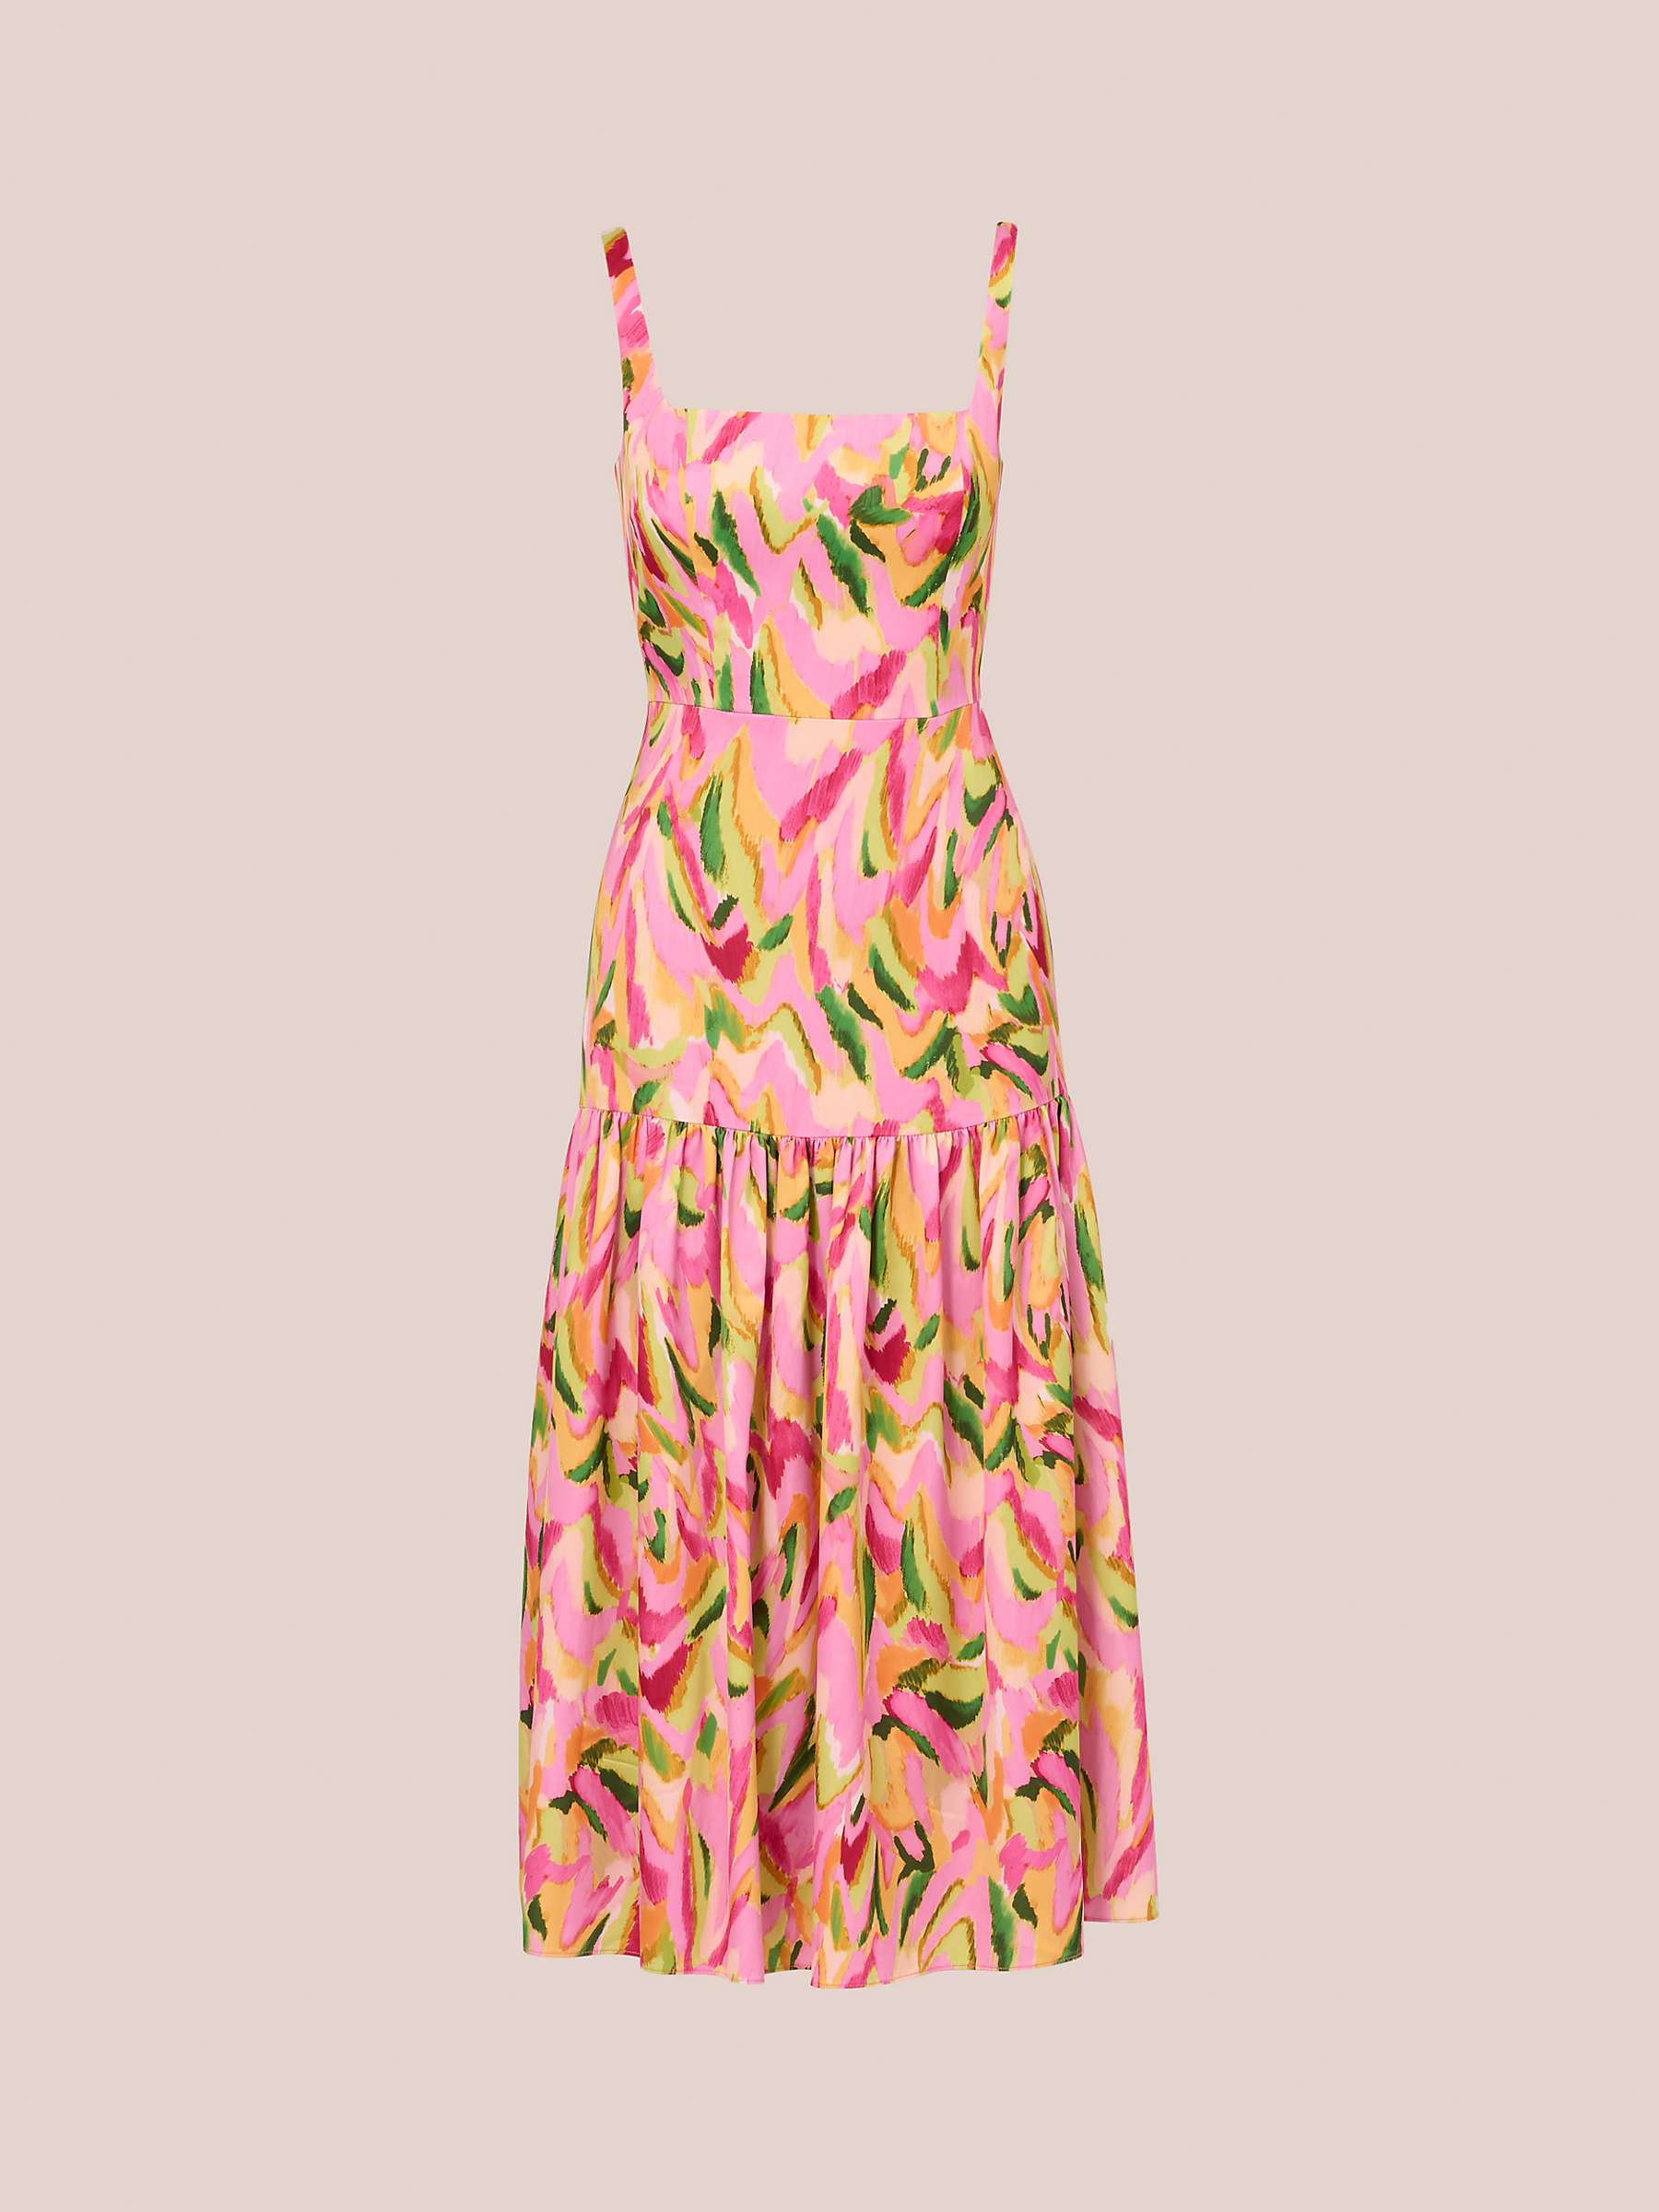 Buy Adrianna By Adrianna Papell Abstract Midi Dress, Pink/Multi Online at johnlewis.com